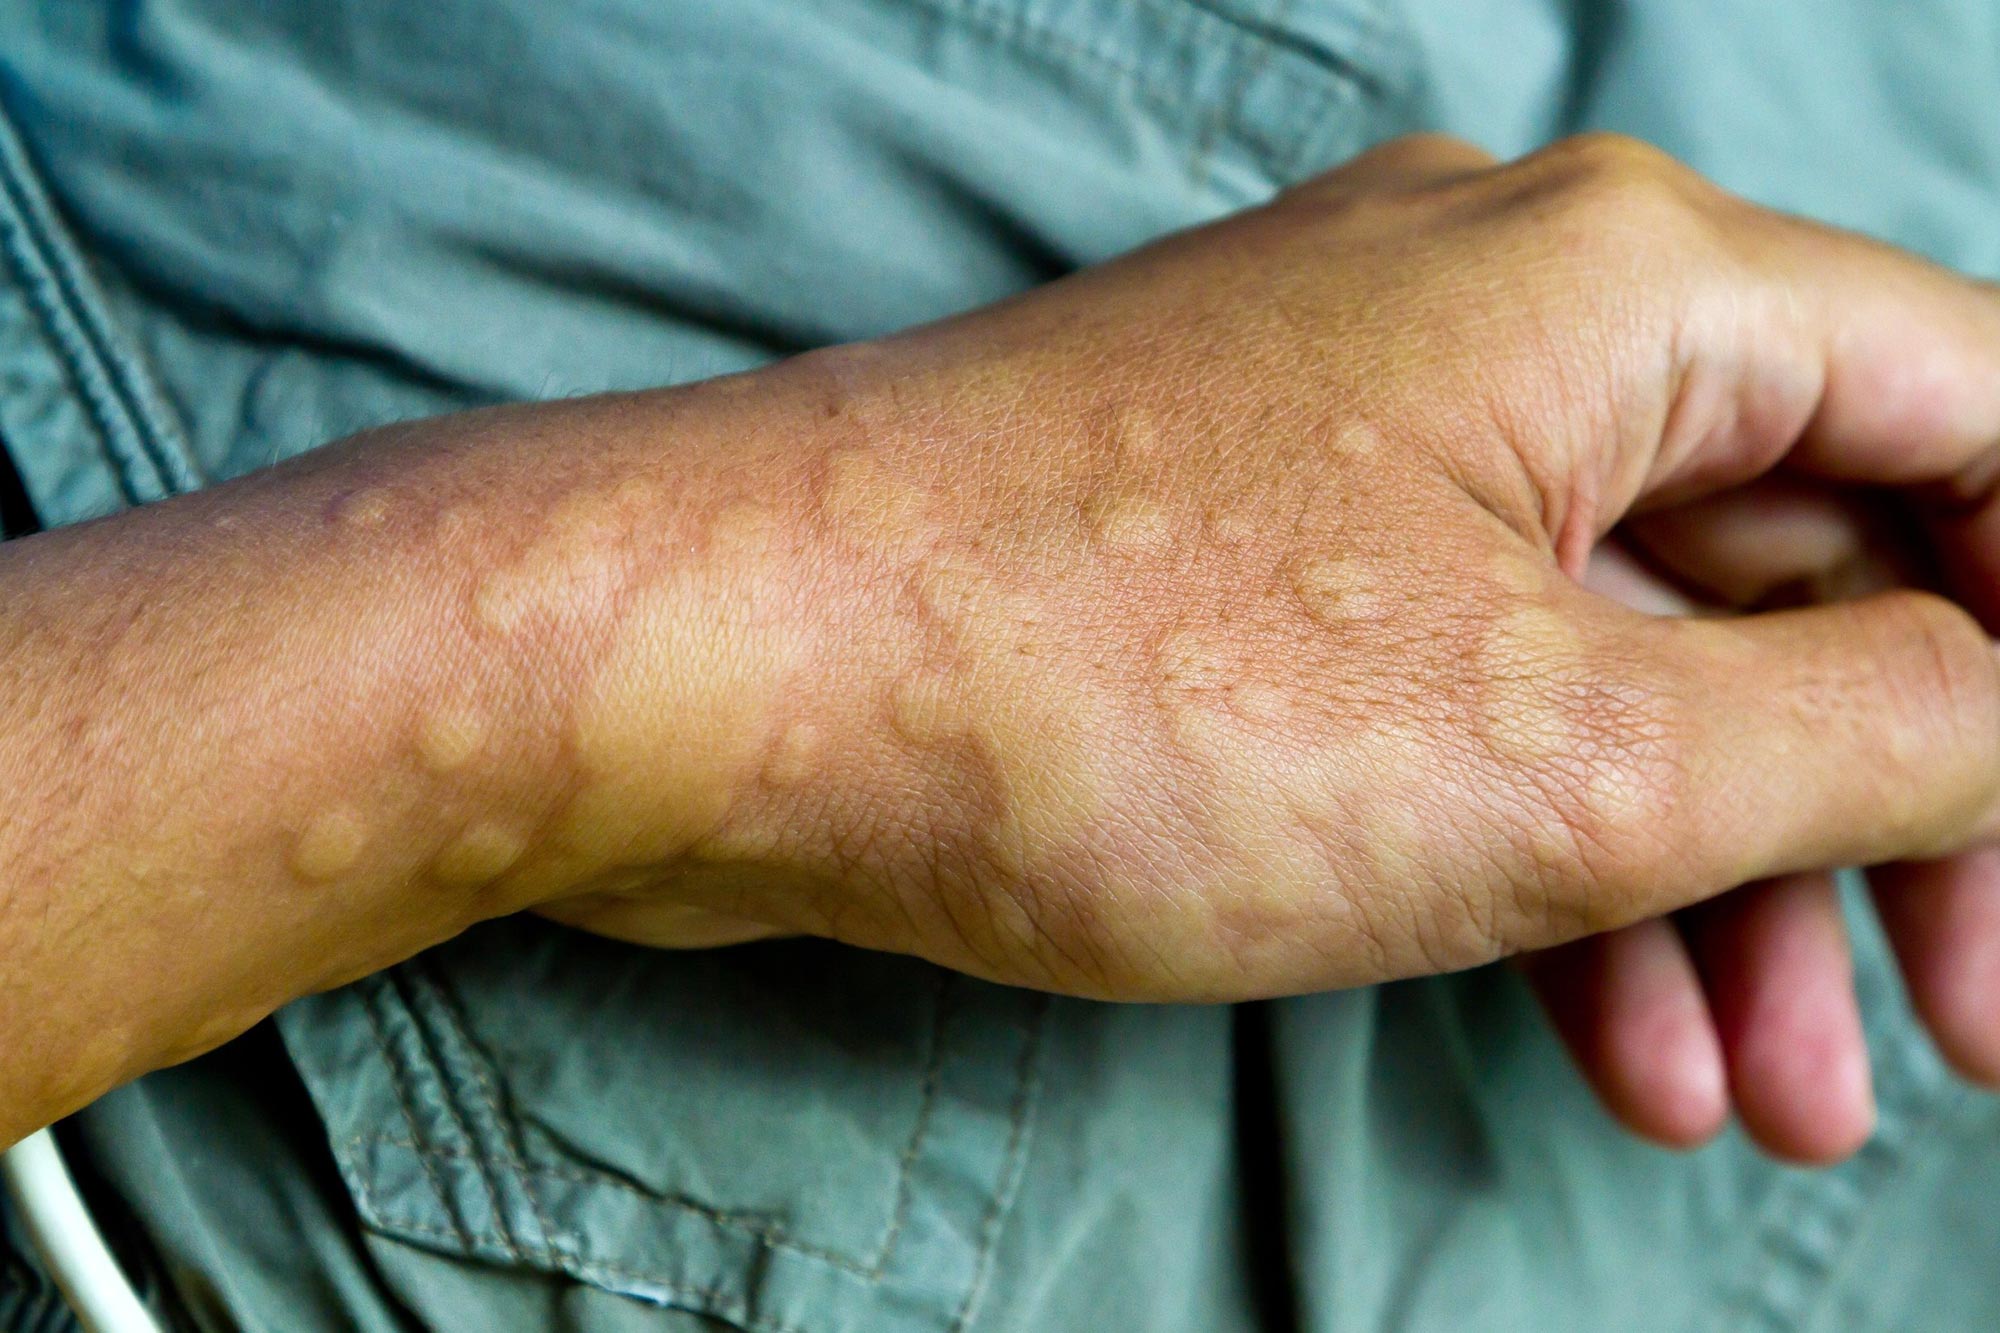 vaccination urticaria recur reassurance concerns scitechdaily